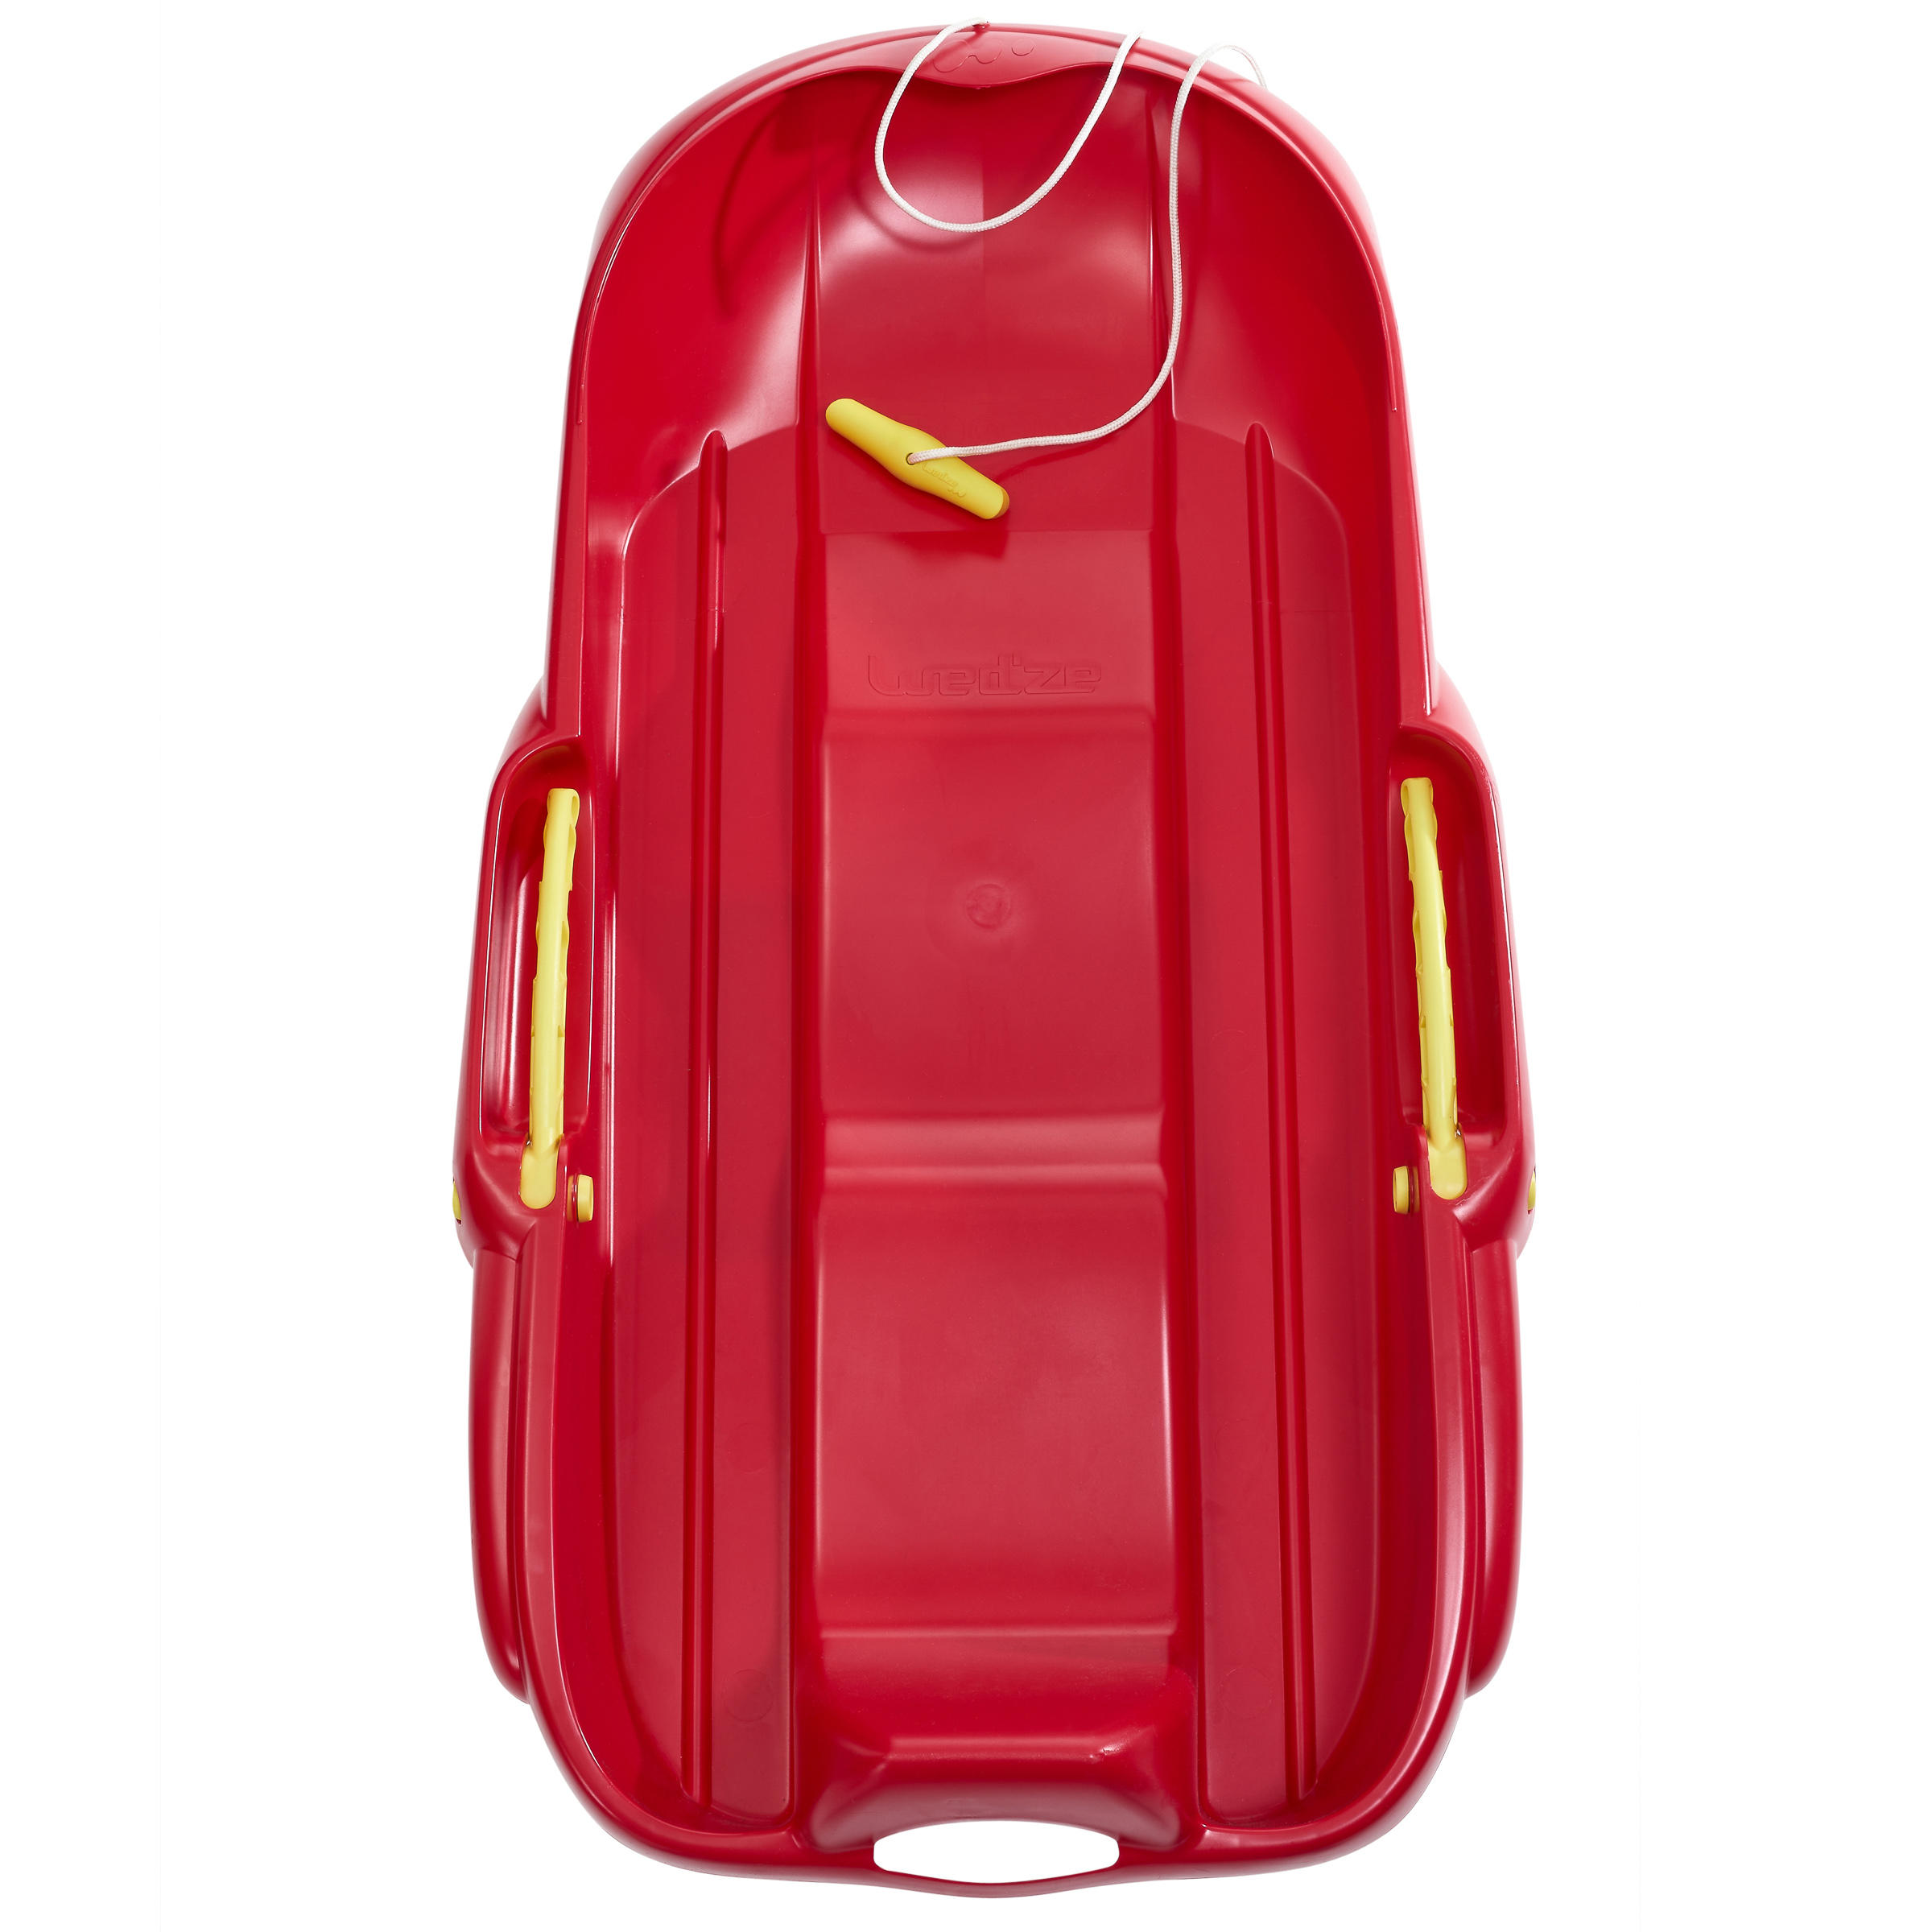 MRZ 100 2-Person Sledge With Brake - Red 1/8